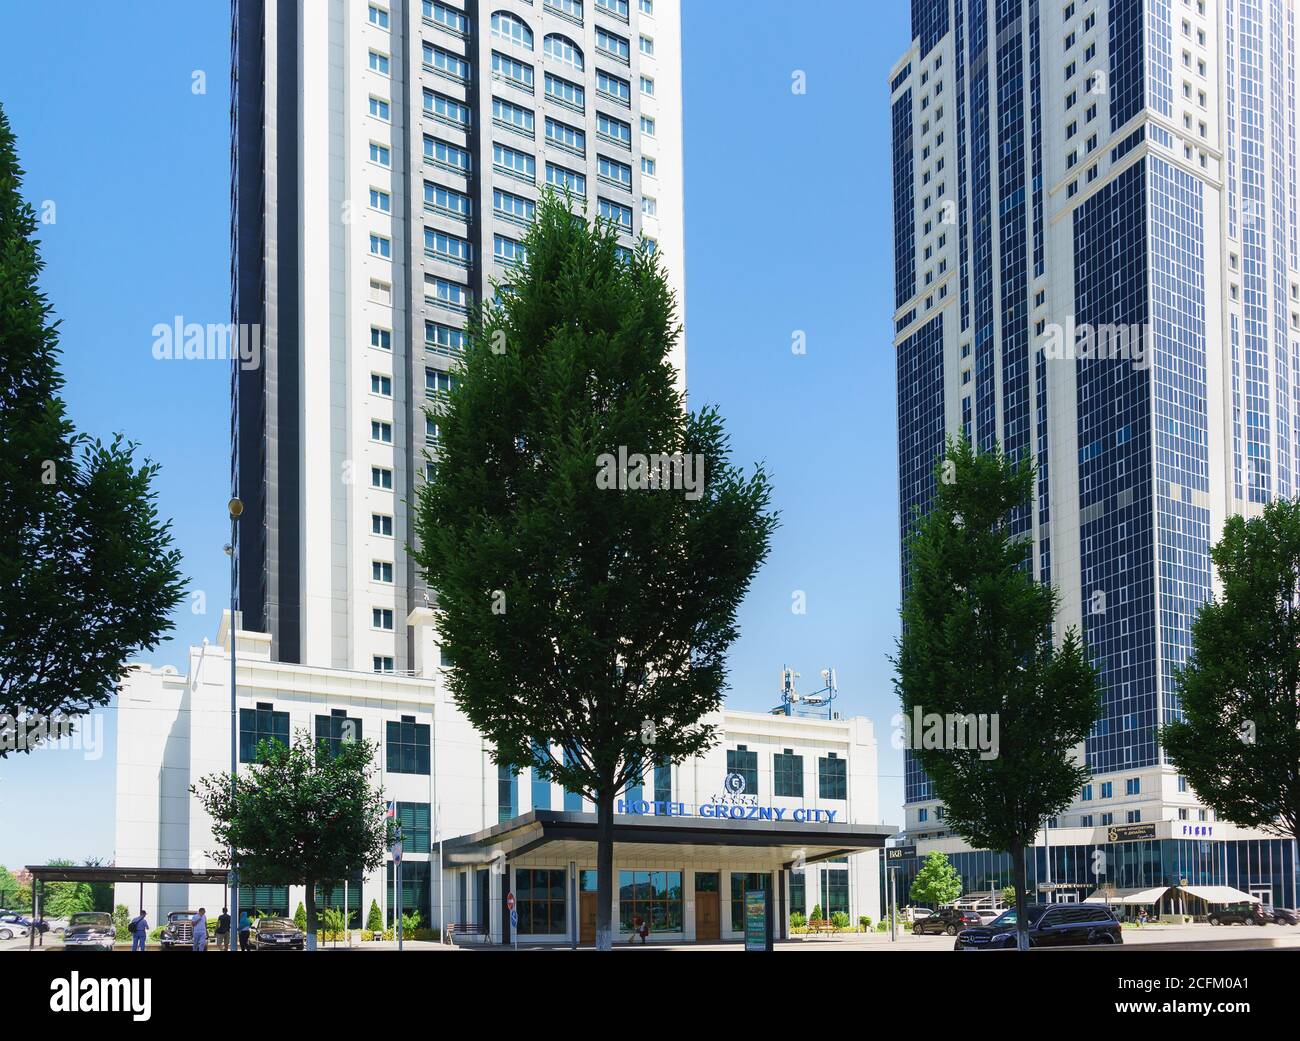 Grozny, Chechen Republic, Russia - June 02, 2019: five-Star hotel Grozny city in the center of the capital of the Republic. The complex of high-rise b Stock Photo